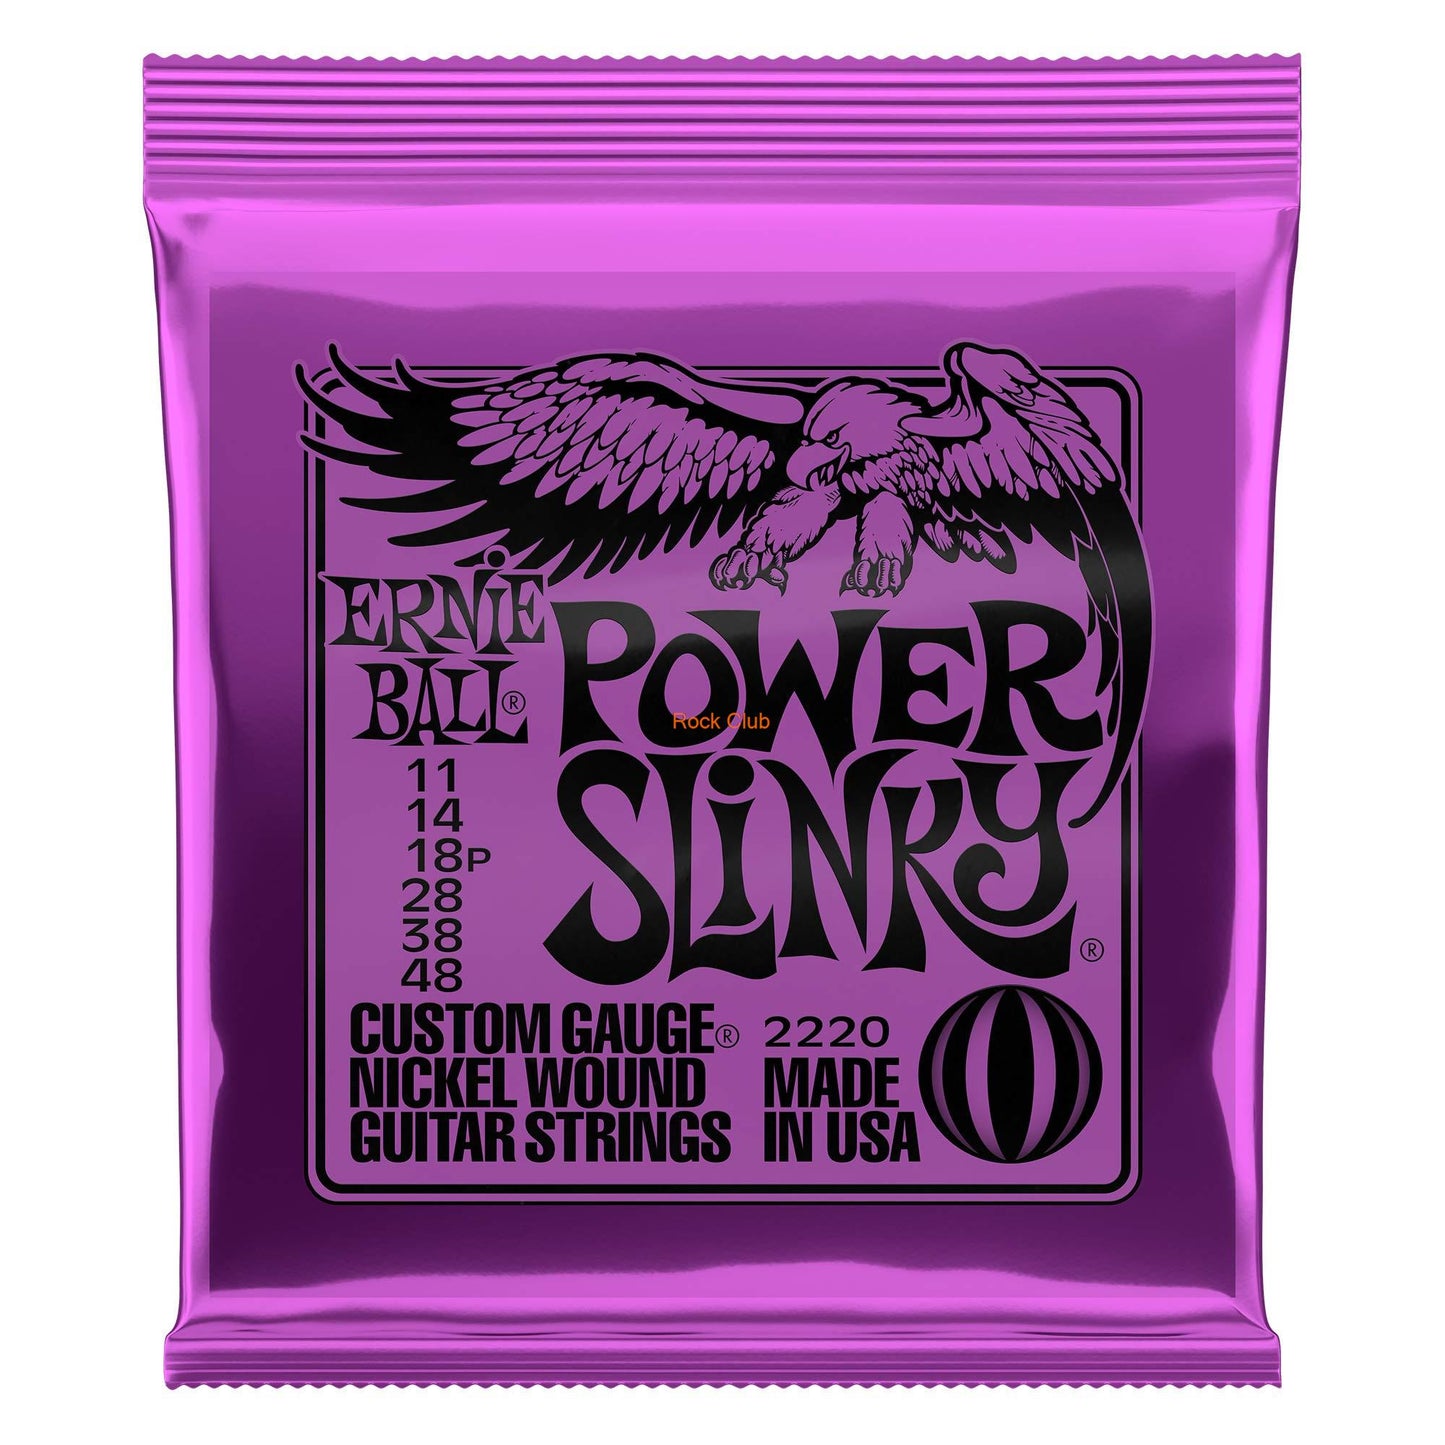 Electric Guitar Strings EXL110 EXL120 EXL130 The Strongest Real Rock 2215 2220 2221 2223 2727 19052 12052 Guitar Accessories